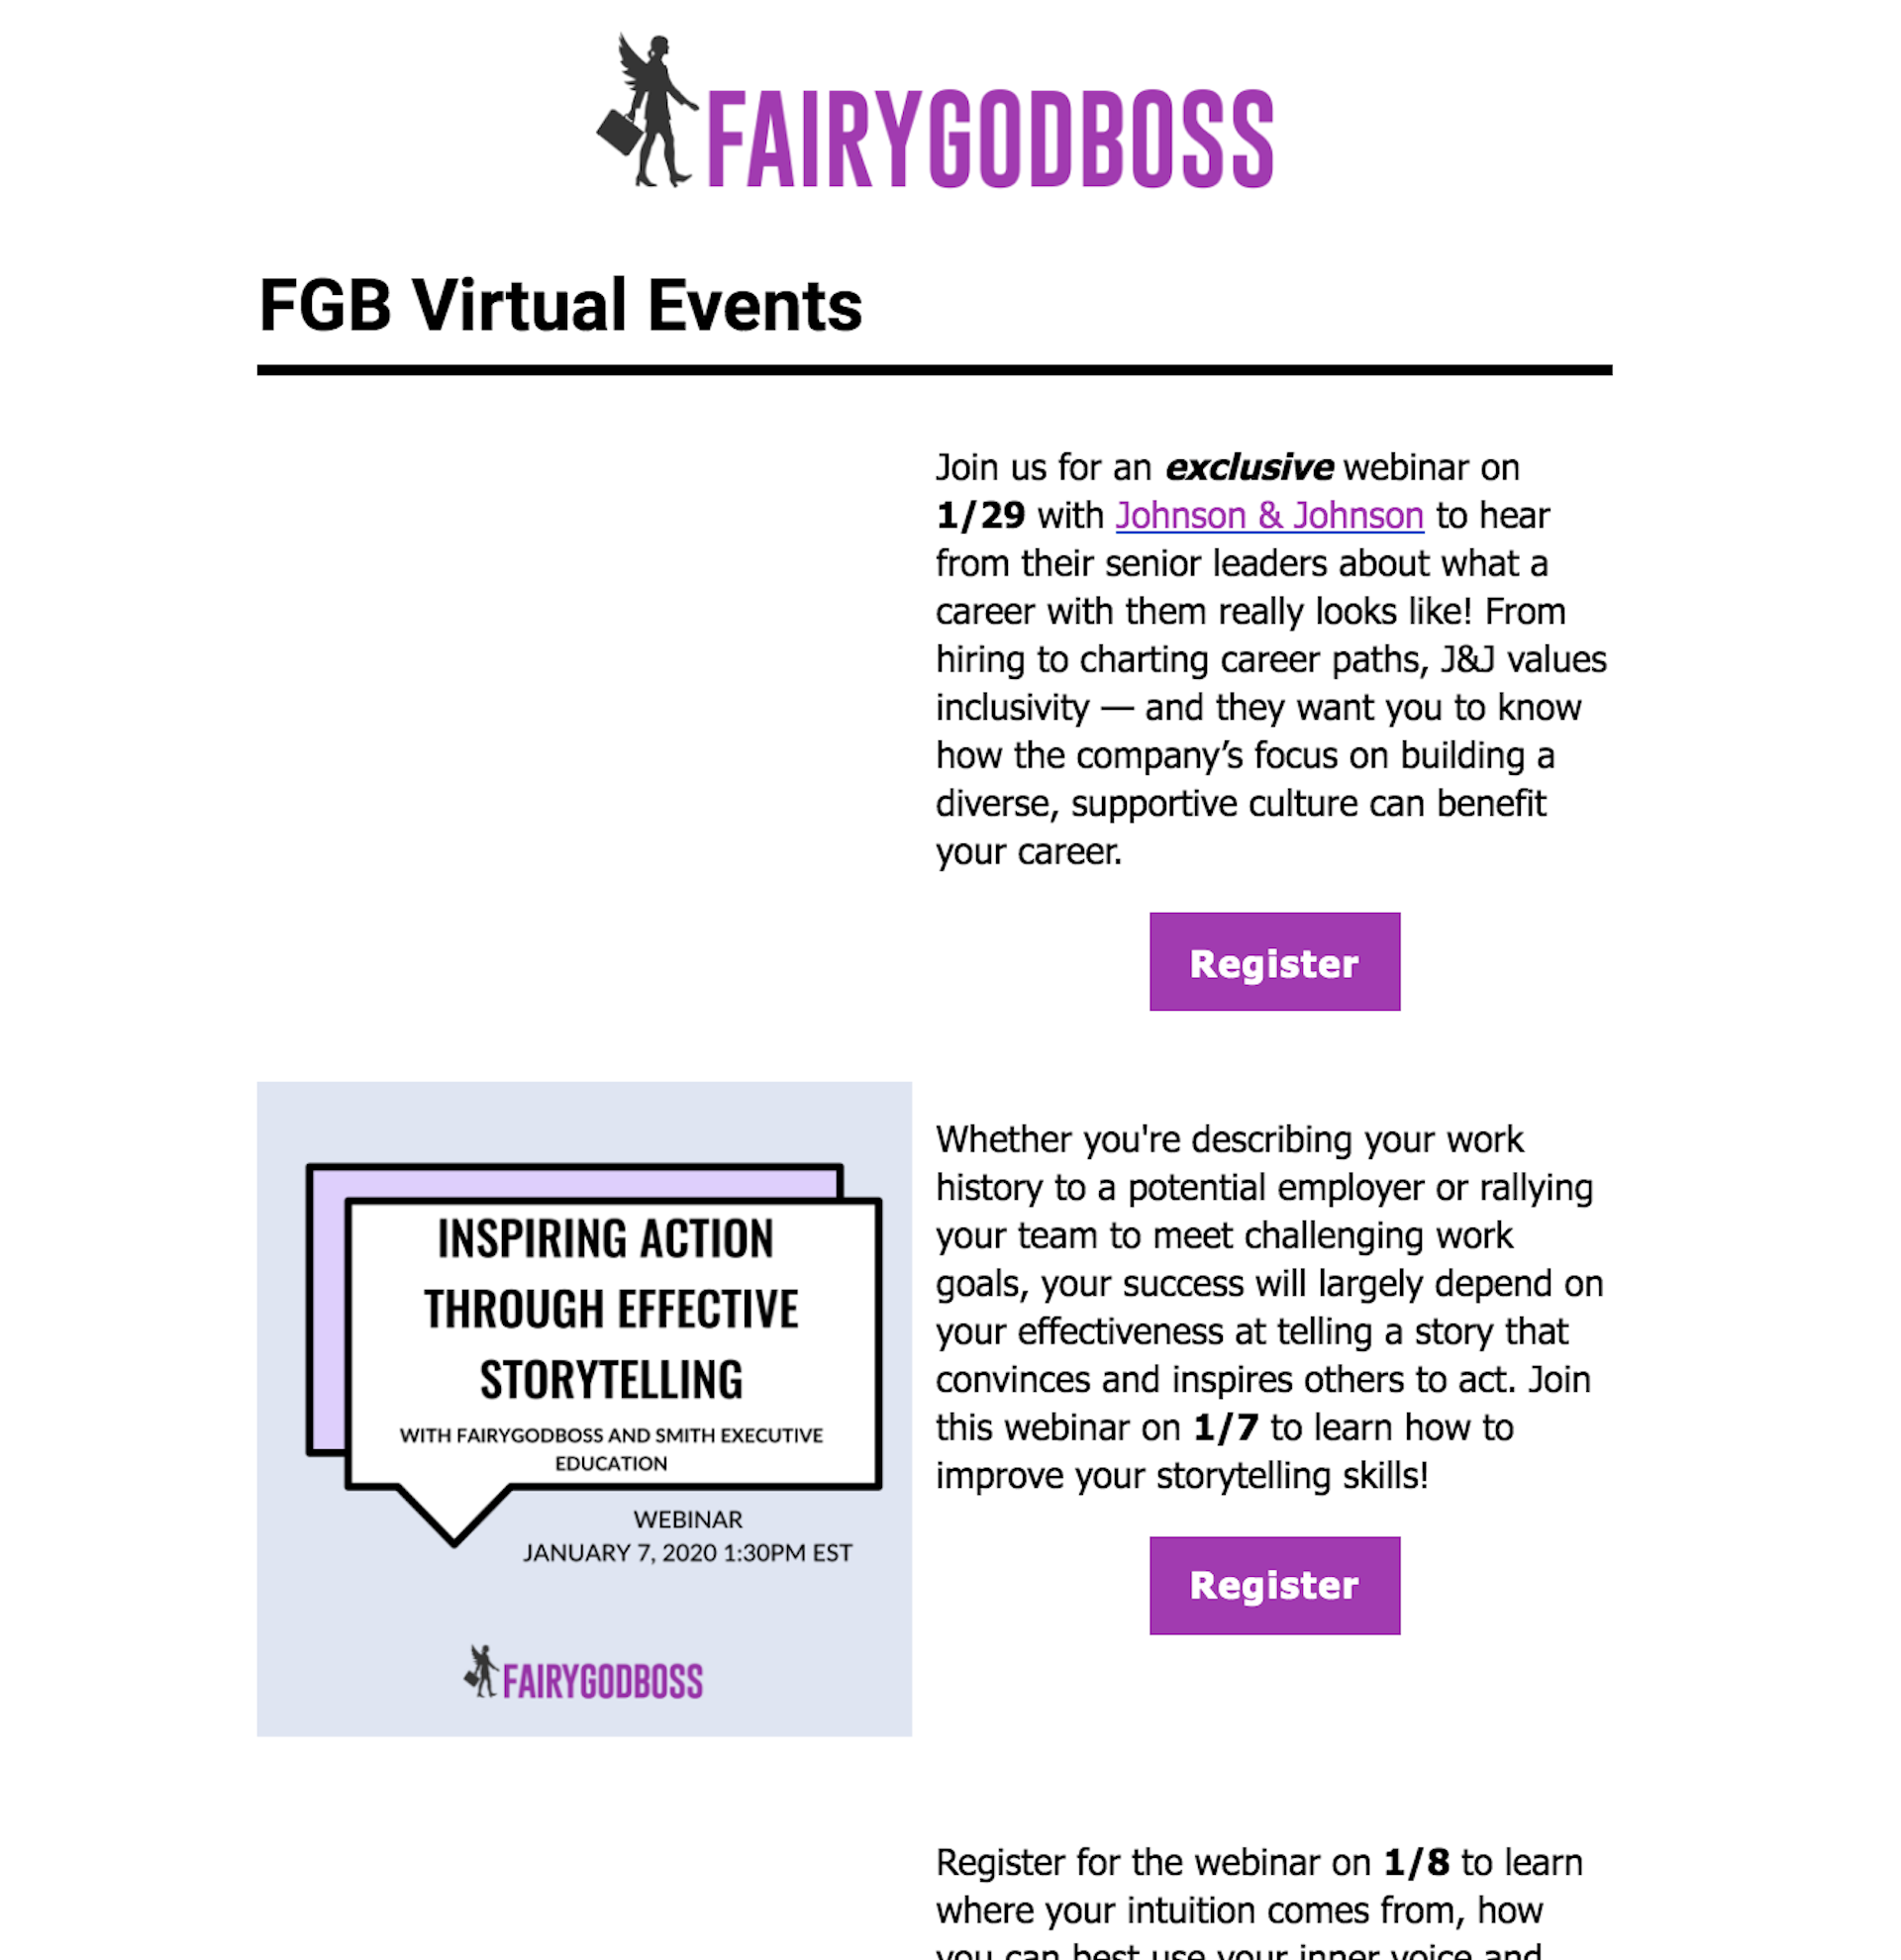 Webinar invitation example from Fairygodboss with great graphics and a clear CTA.